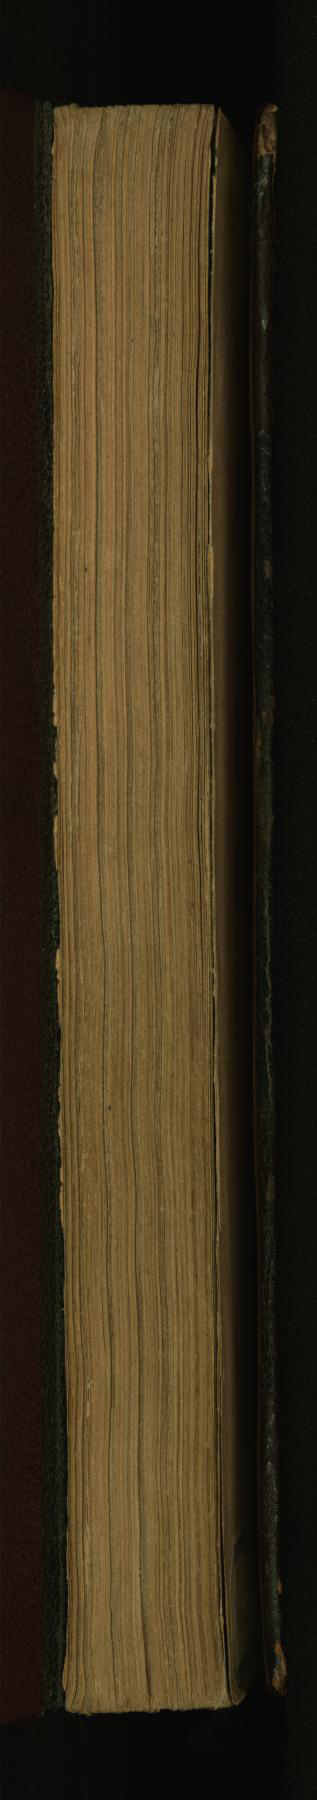 Image for Binding from Collection of Poems (divan)